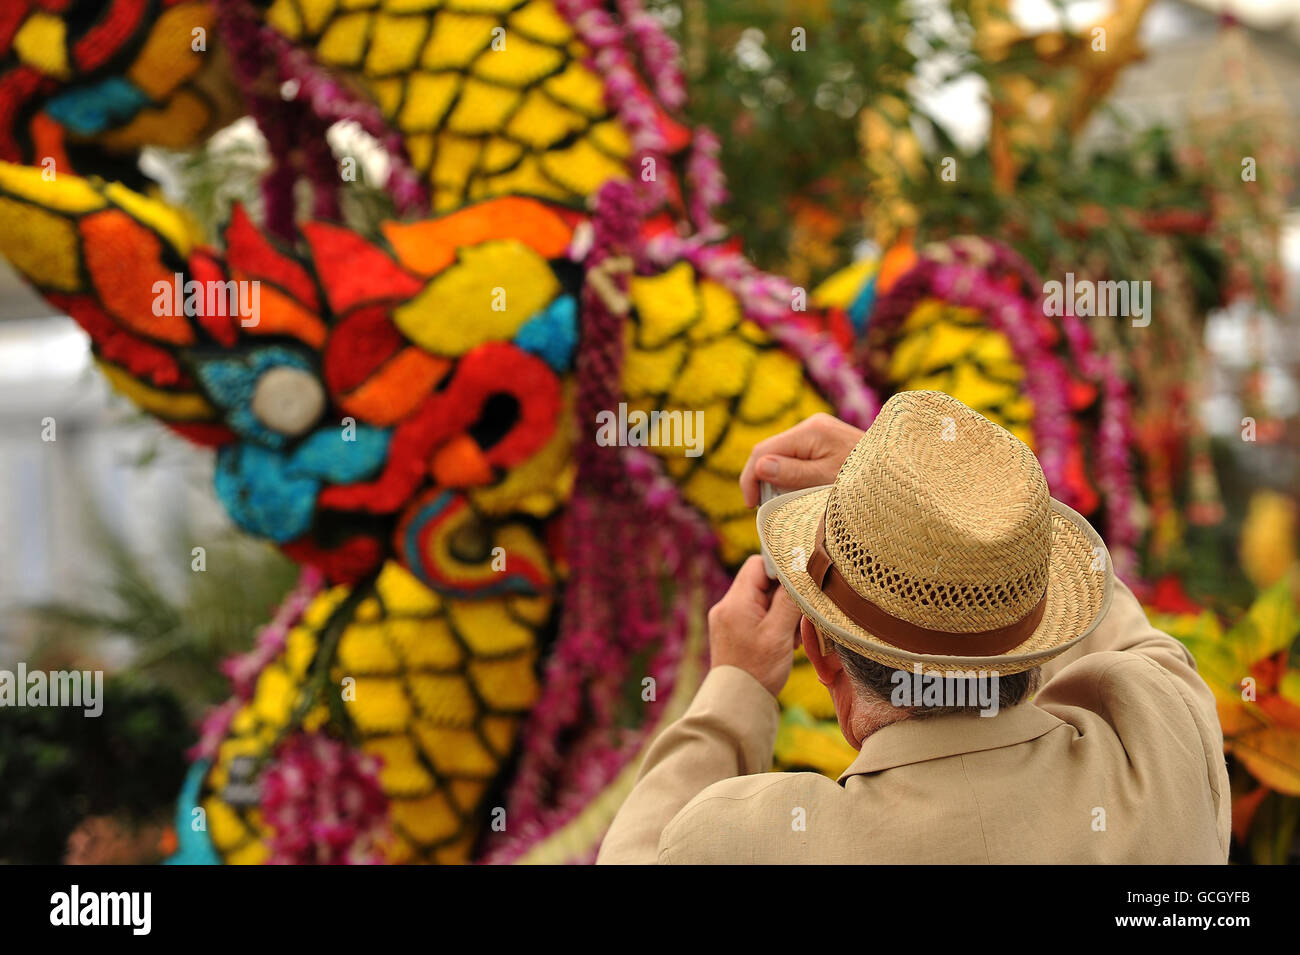 A visitor photographs a Naga serpent dragon formed from orchid petals, in the Nong Nooch Tropical Botanical Garden, at the RHS Chelsea Flower Show. Stock Photo